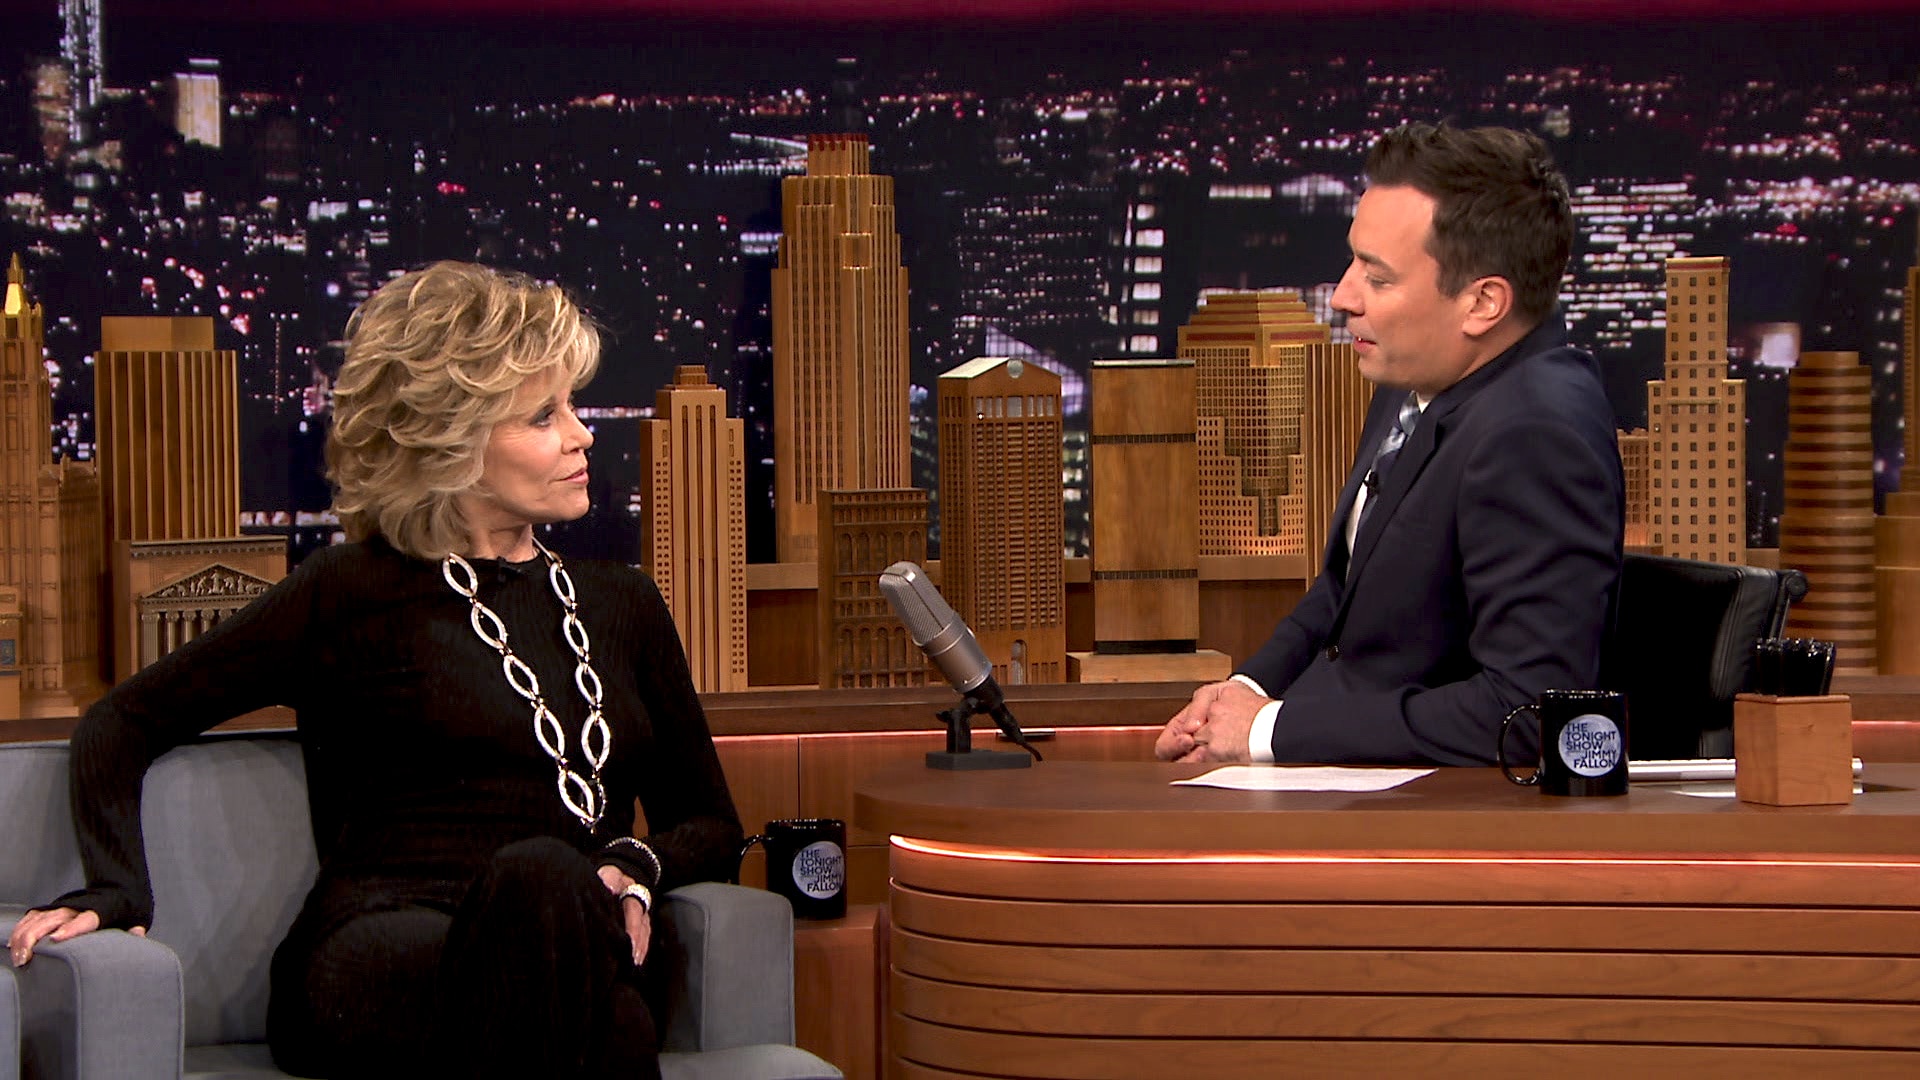 Jane fonda defends gay rights in viral interview unearthed